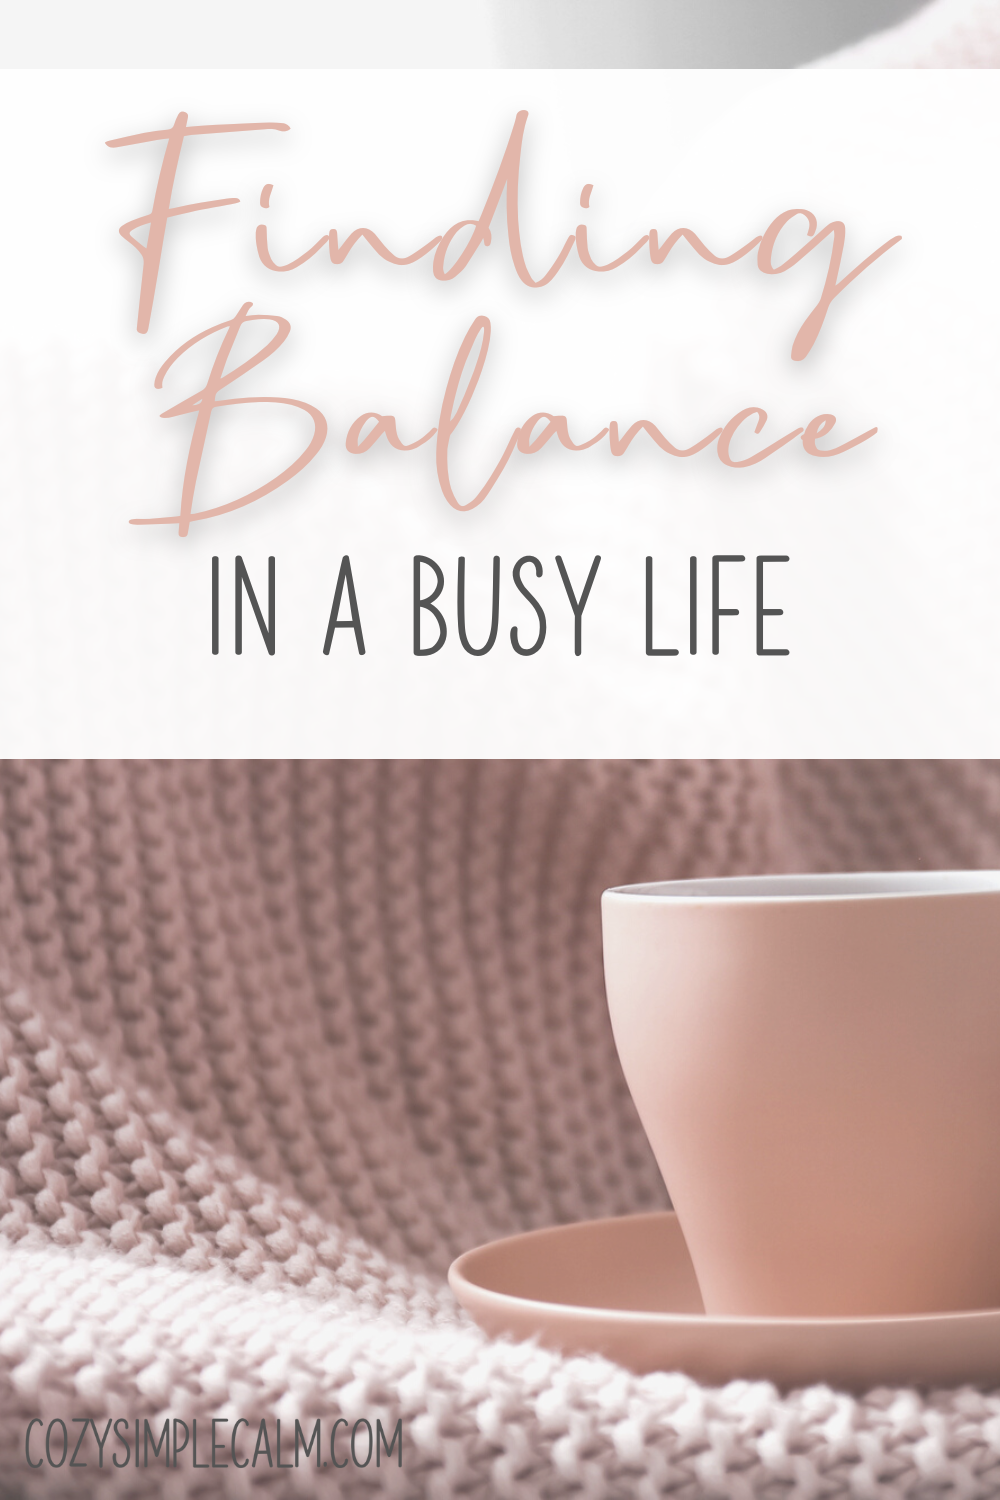 Image of pink mug sitting on pink knit blanket - Text overlay: Finding Balance in a Busy Life